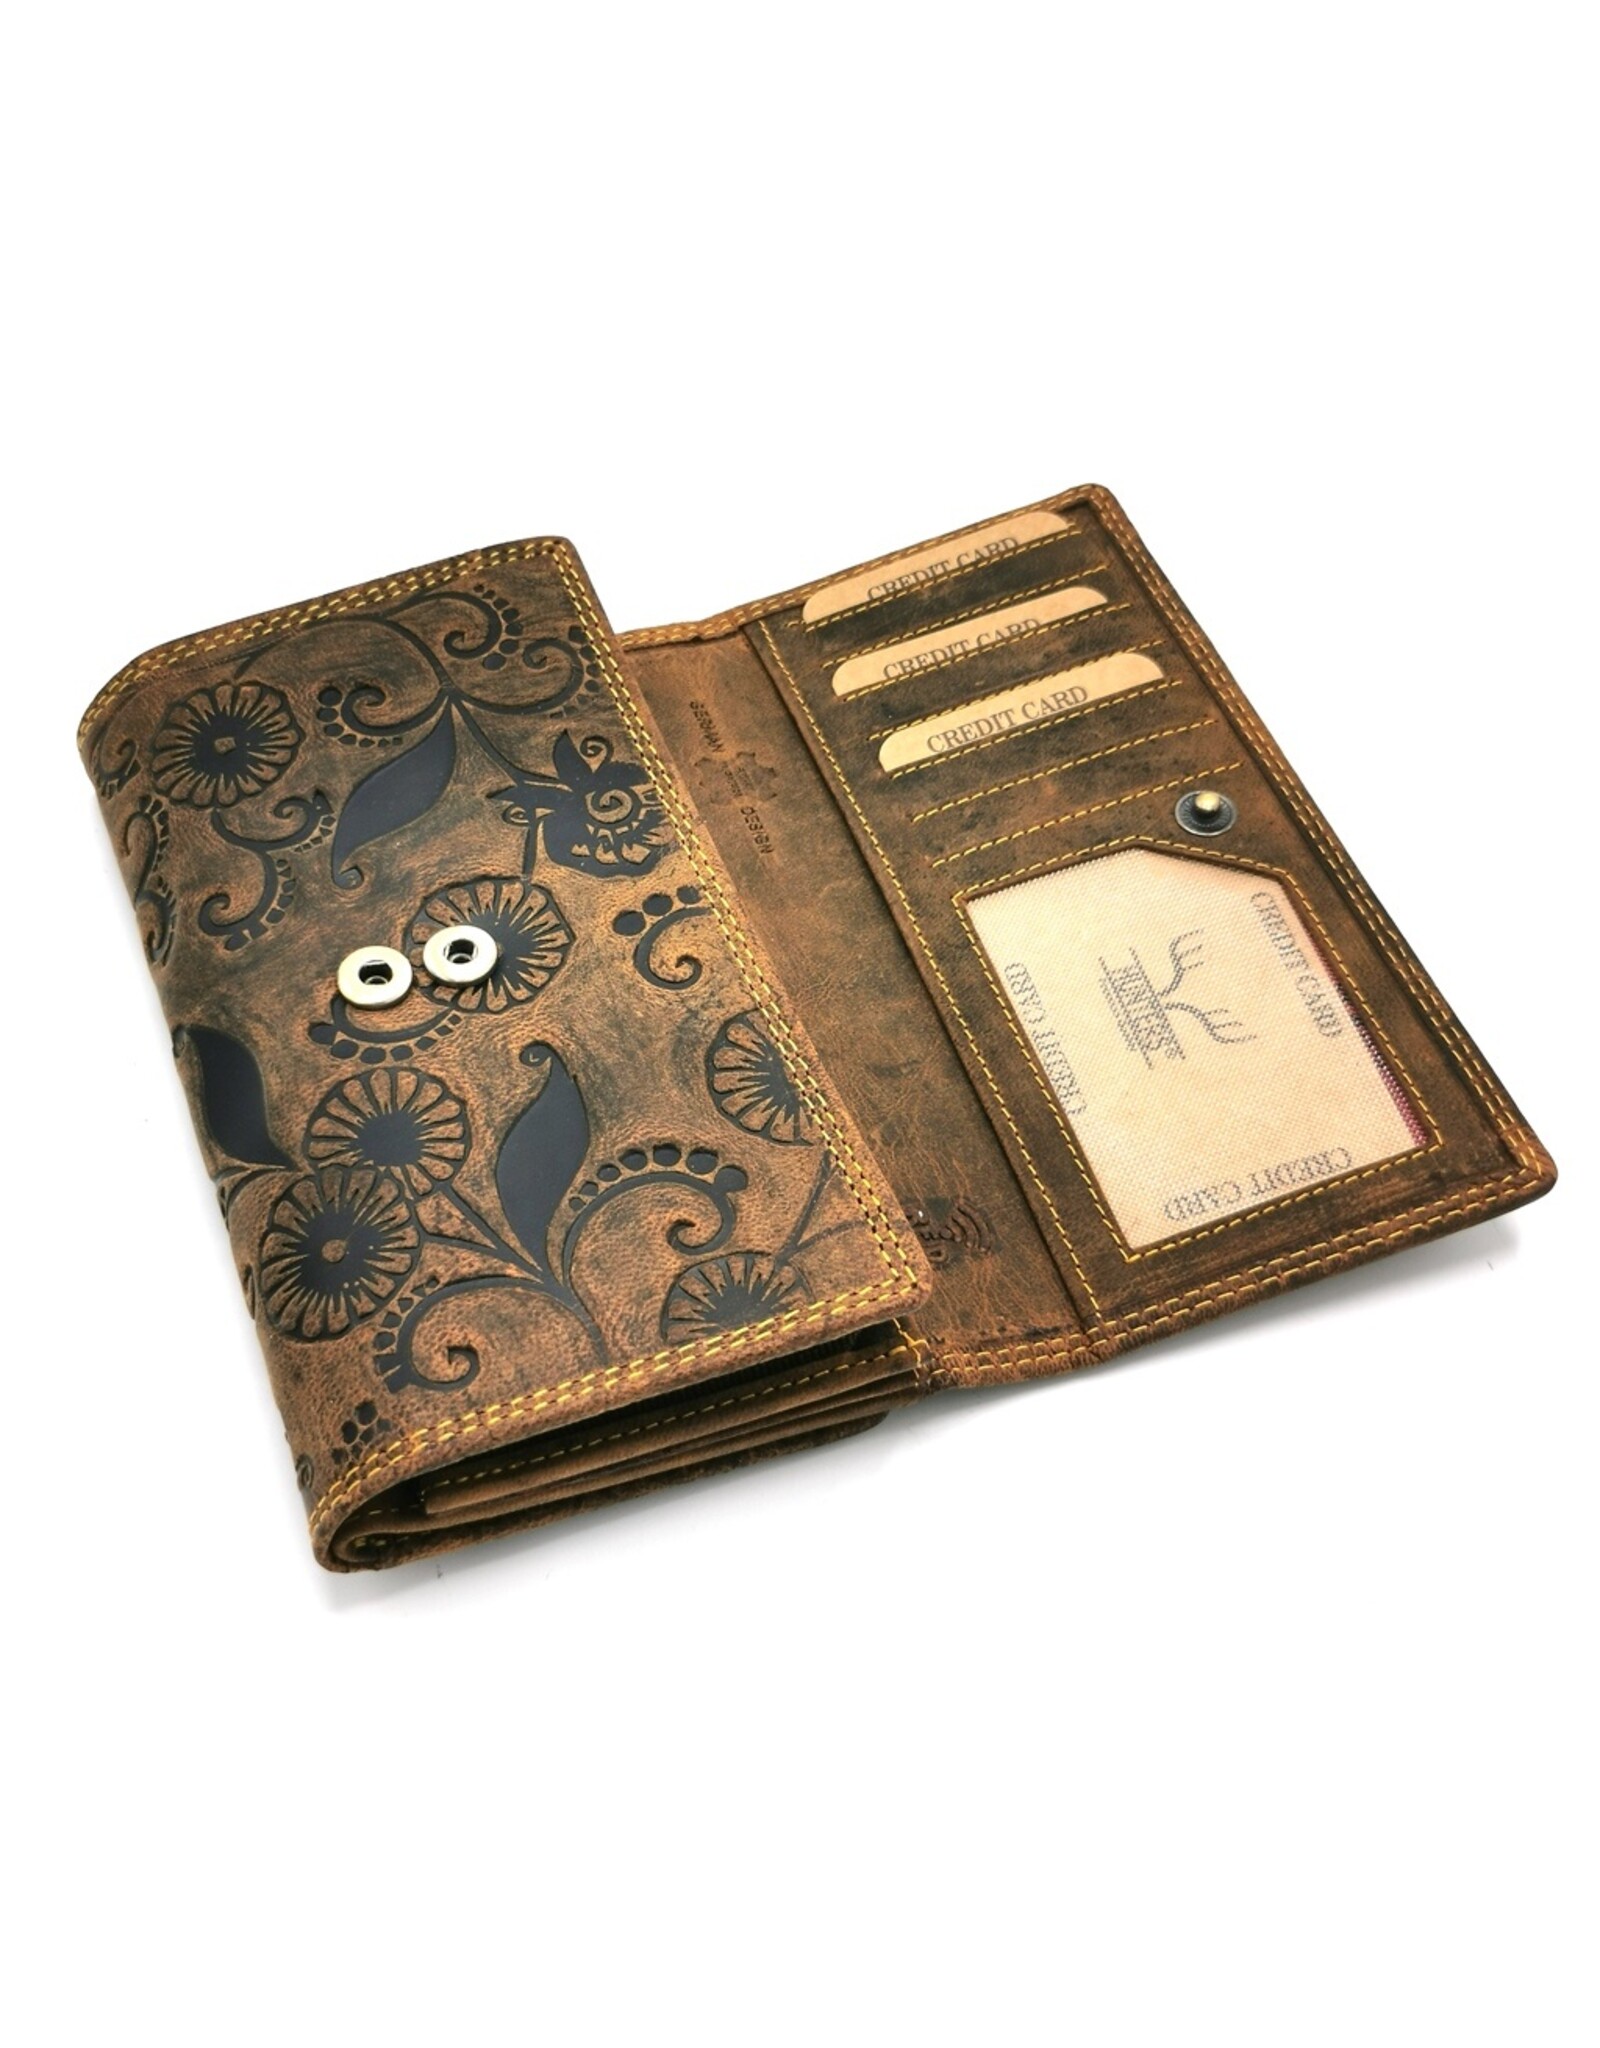 Hunters Leather Wallets - Leather wallet with embossed Daisies RFID